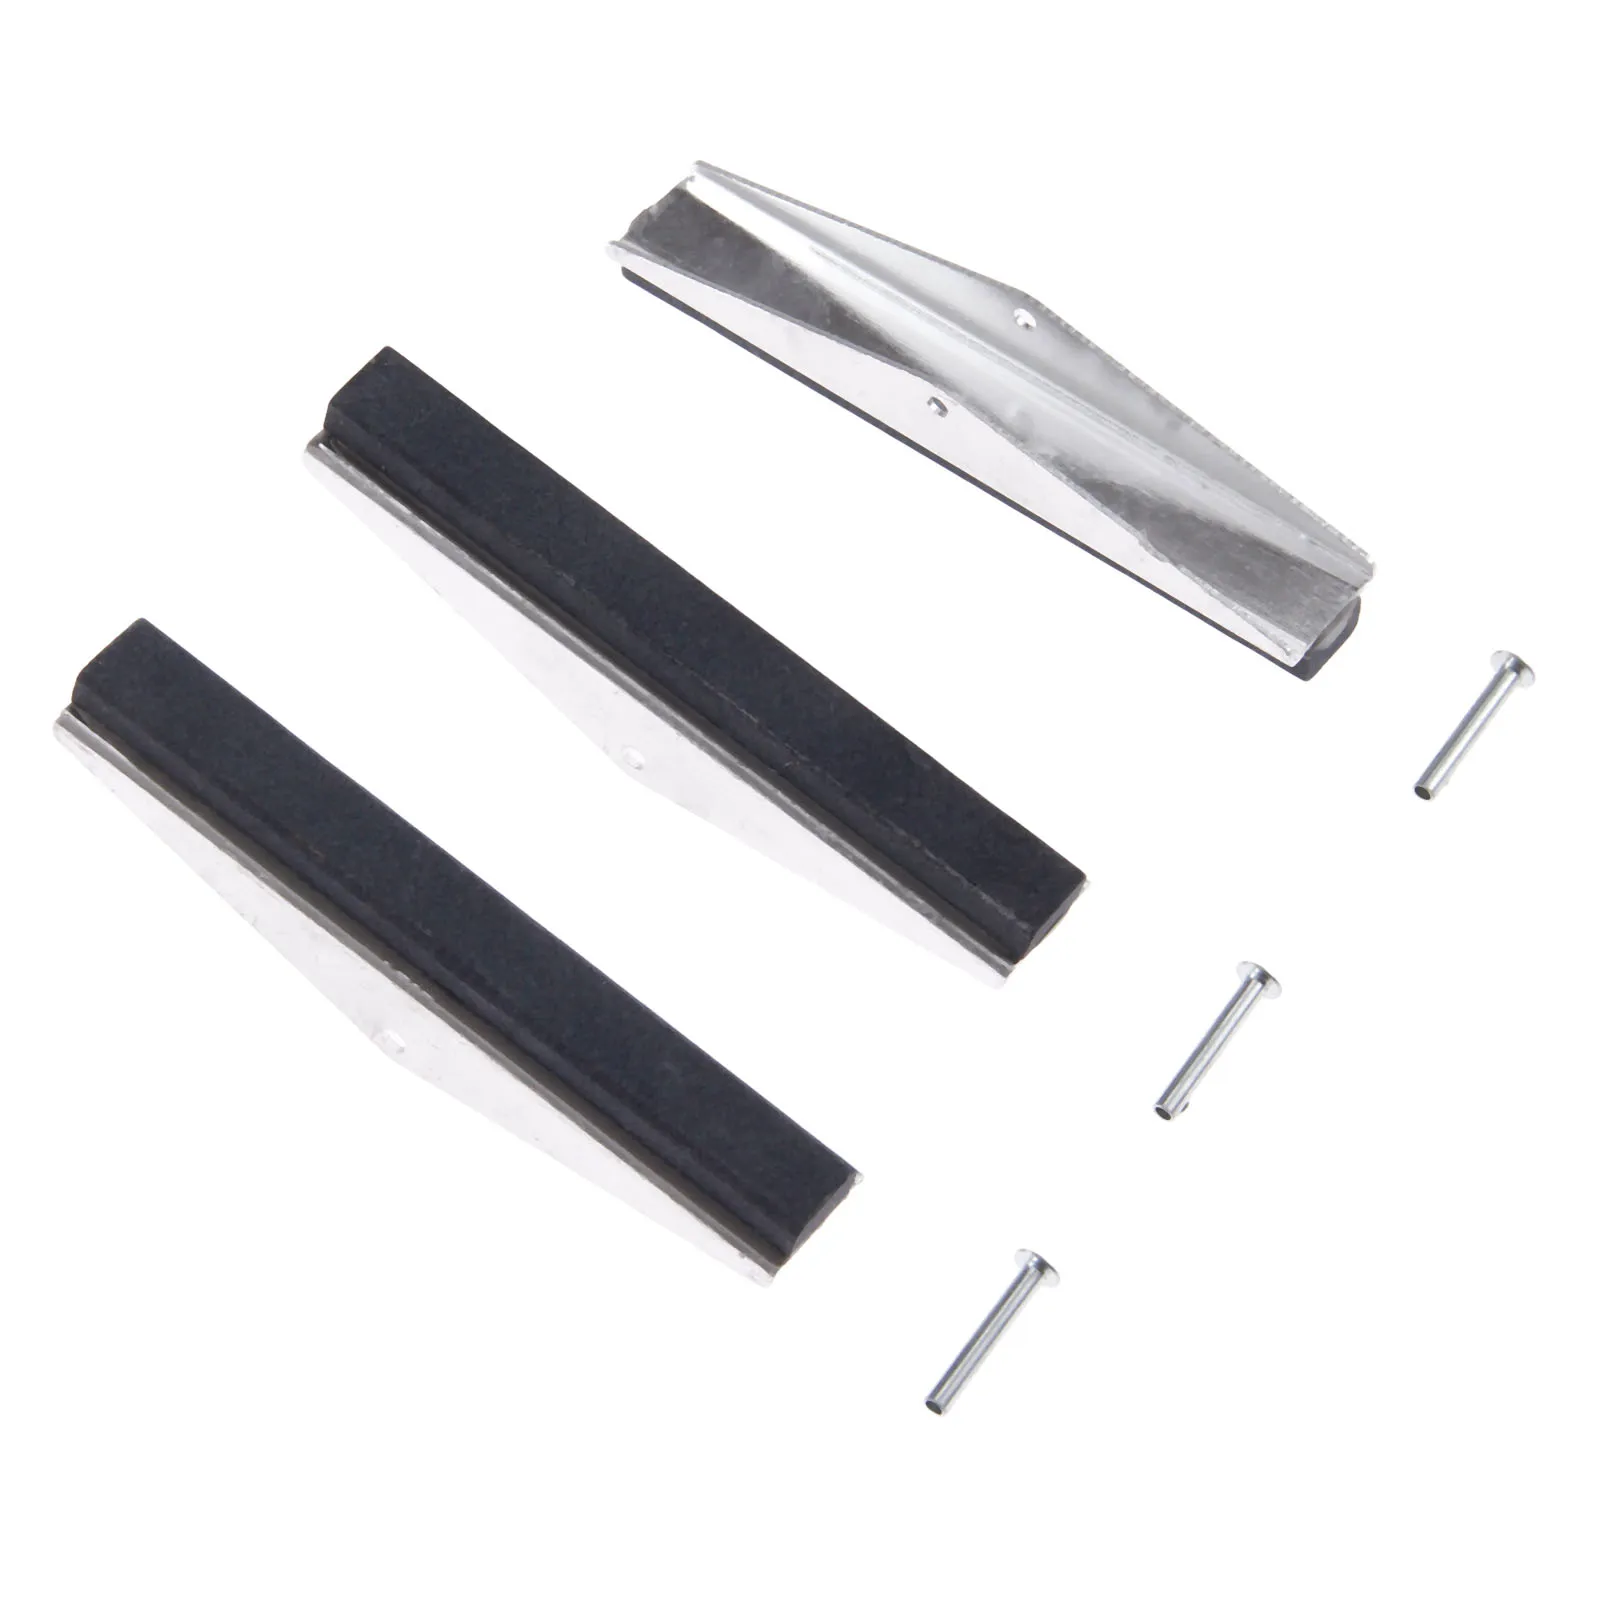 Engine Cylinder Honing Tool Replacement Stones Set 3 Piece 100mm 